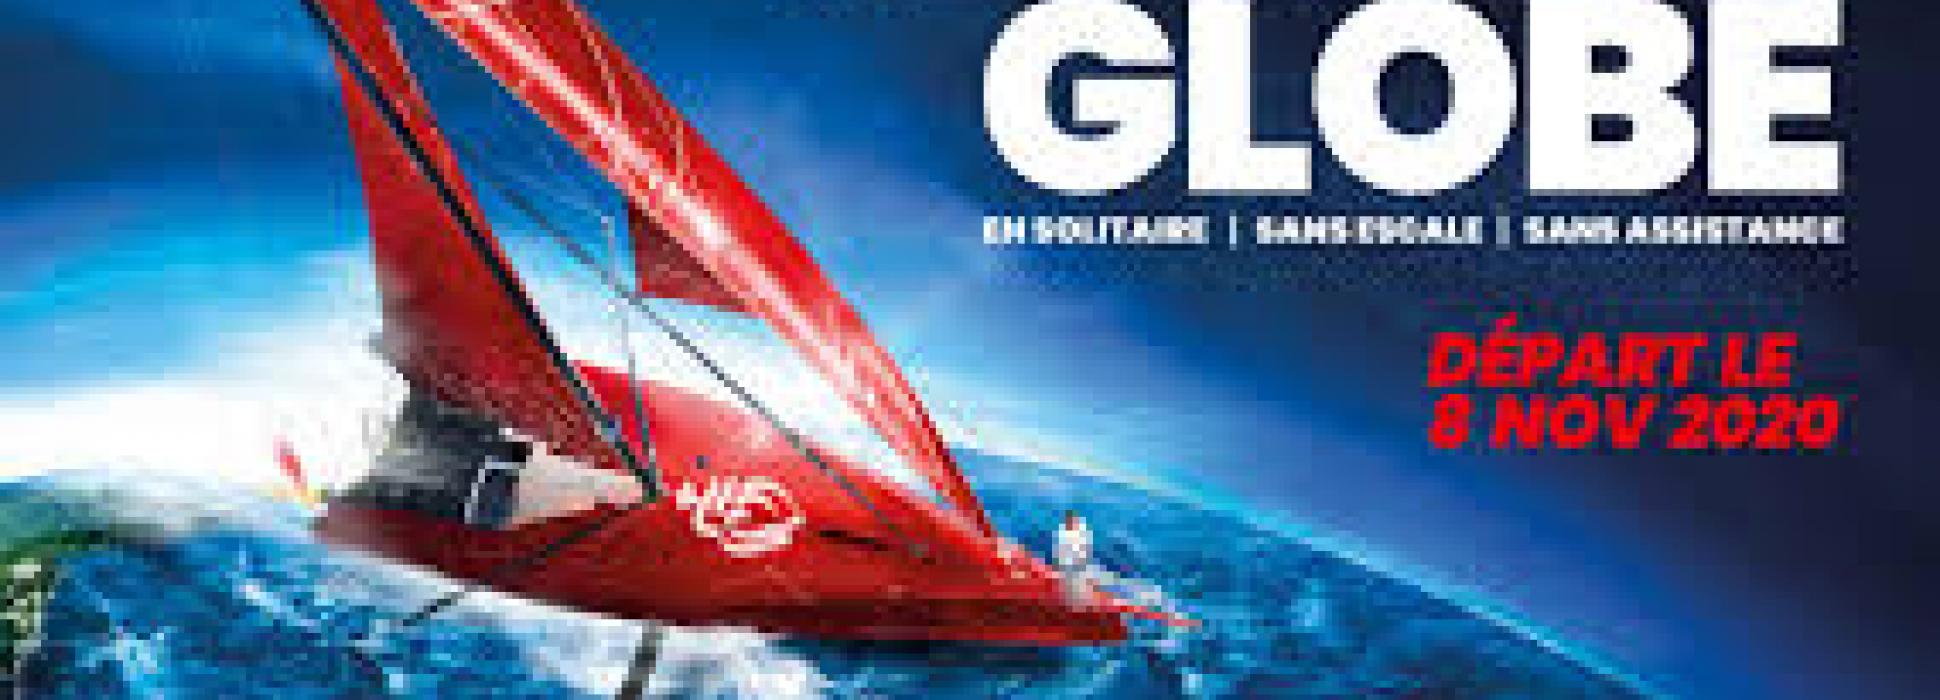 Vendée Globe 2020-2021 - a third of the skippers are based or train at Lorient la Base